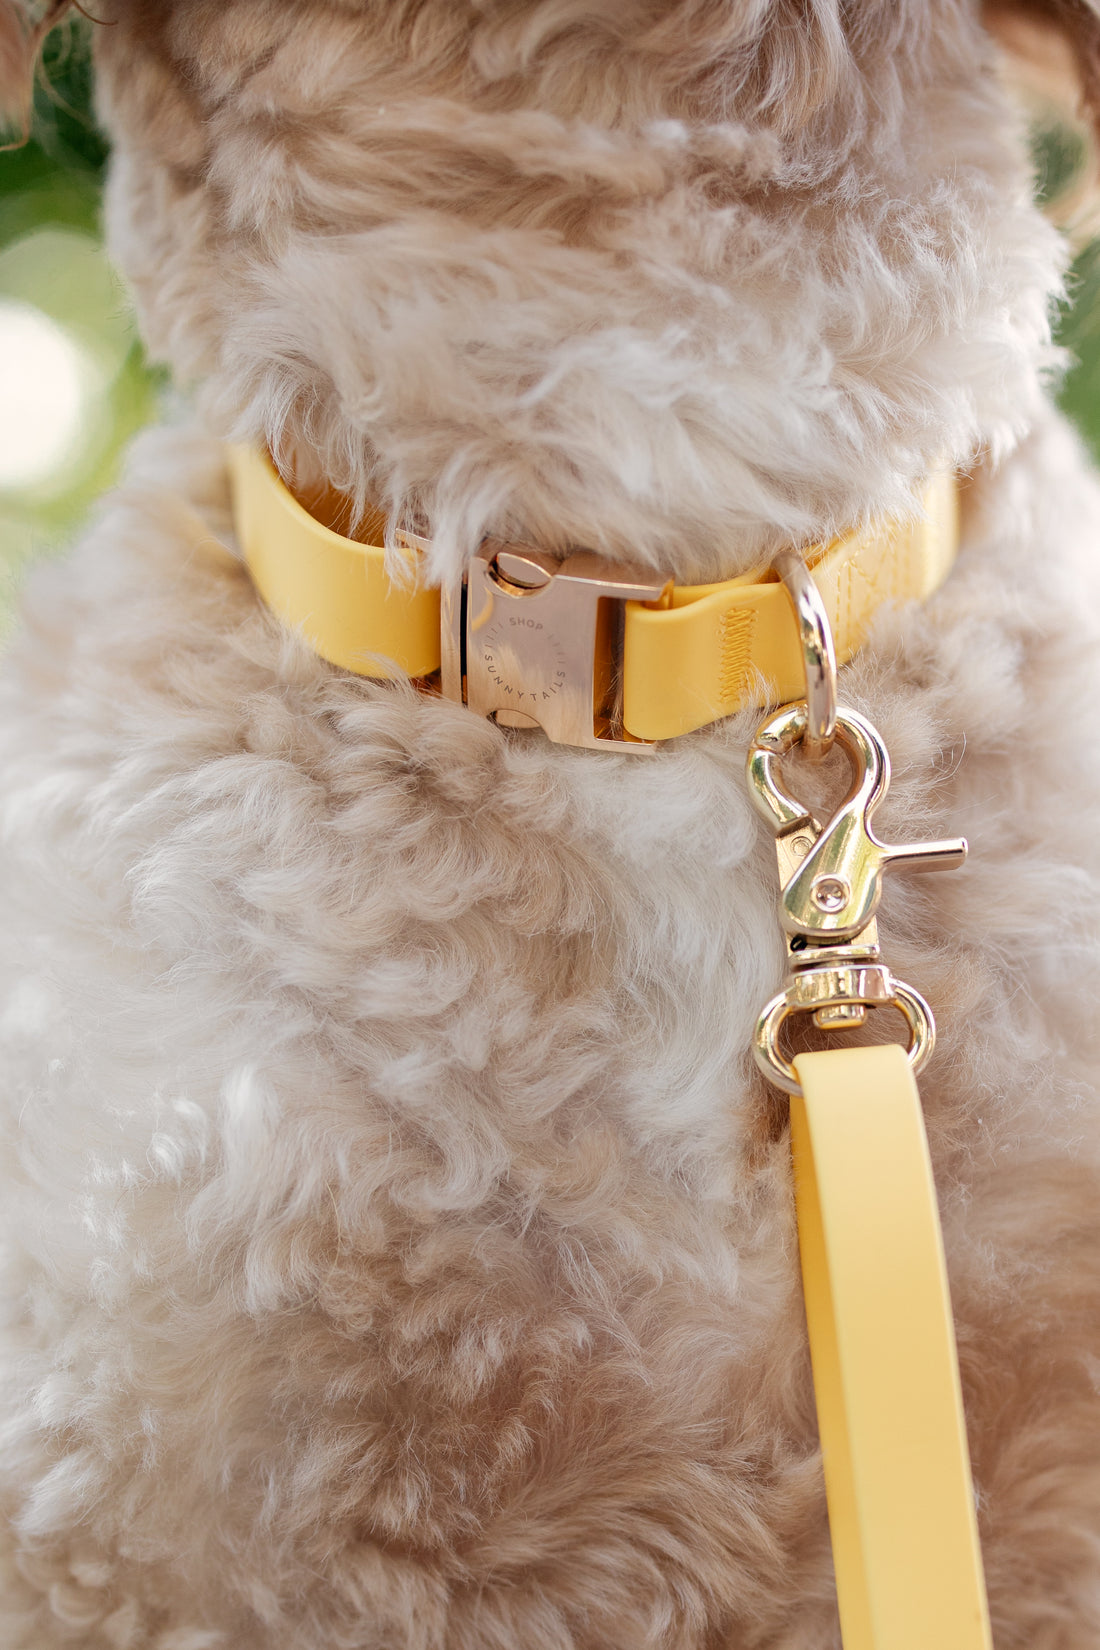 Dandelion Yellow Dog Collar | Waterproof Quick Release Collar | Available in 3 Sizes | Durable Dog Collars | Shop Sunny Tails